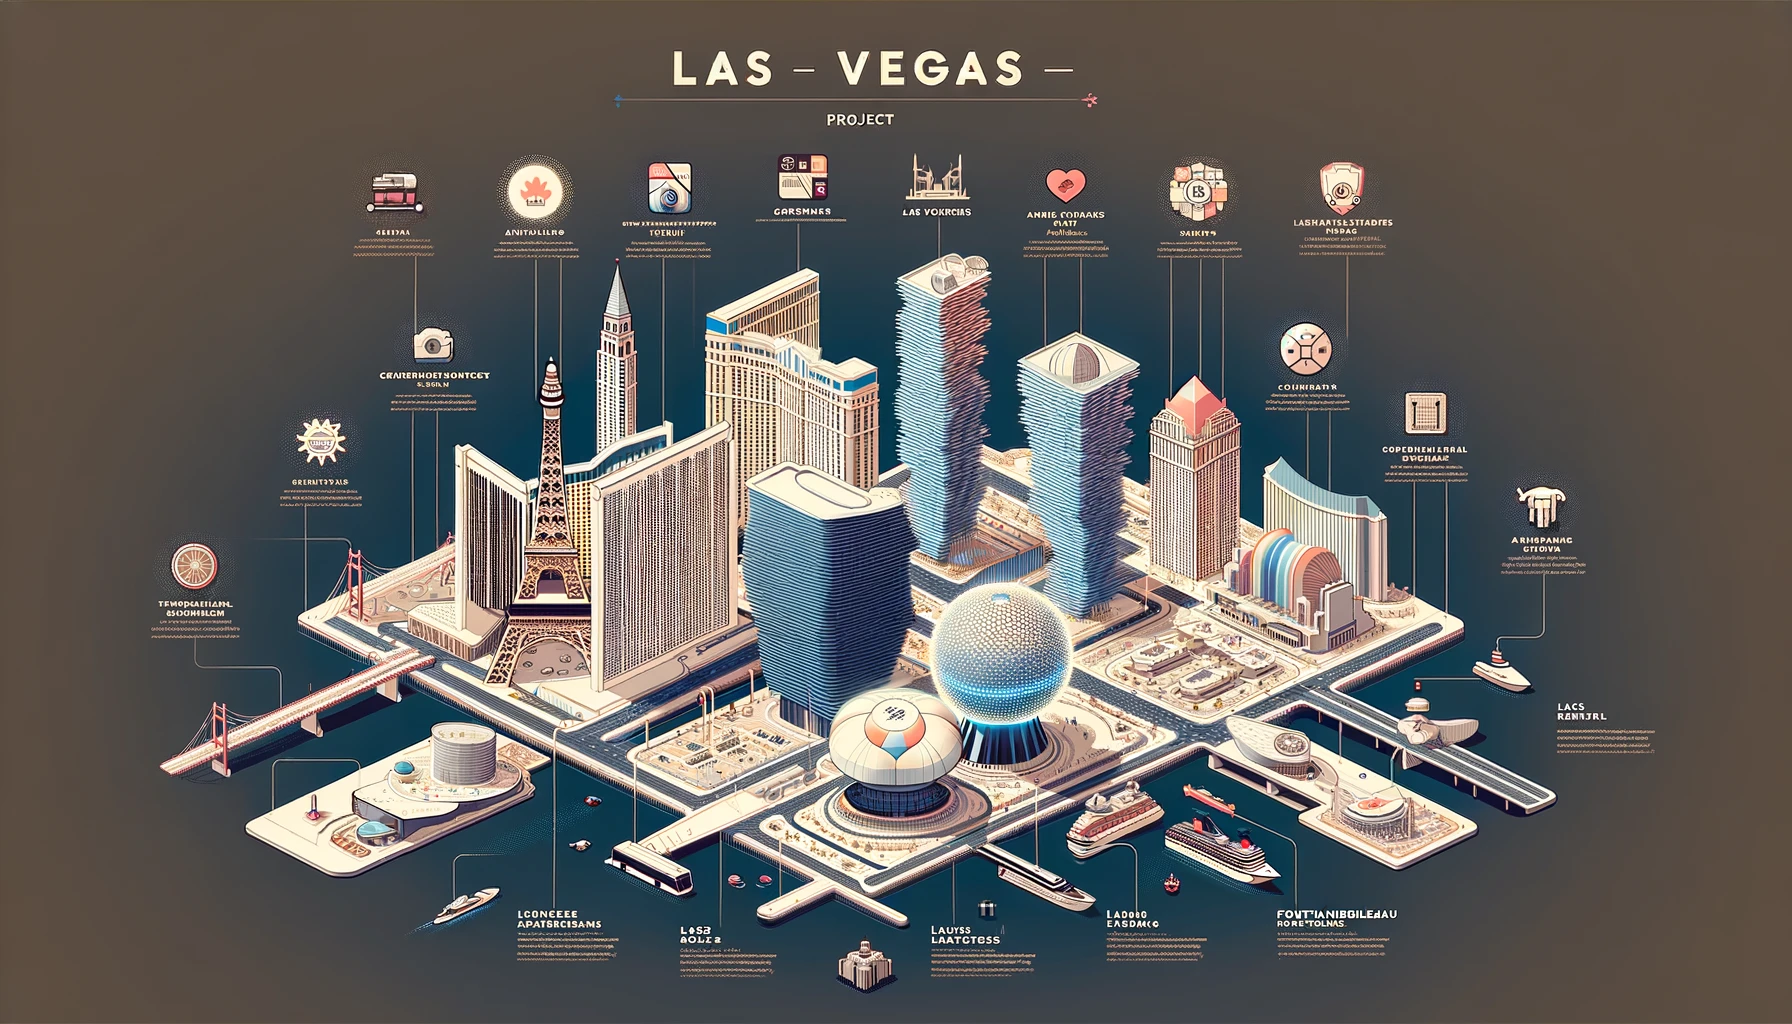 Infographic of Las Vegas architectural landmarks with symbols and minimal text.